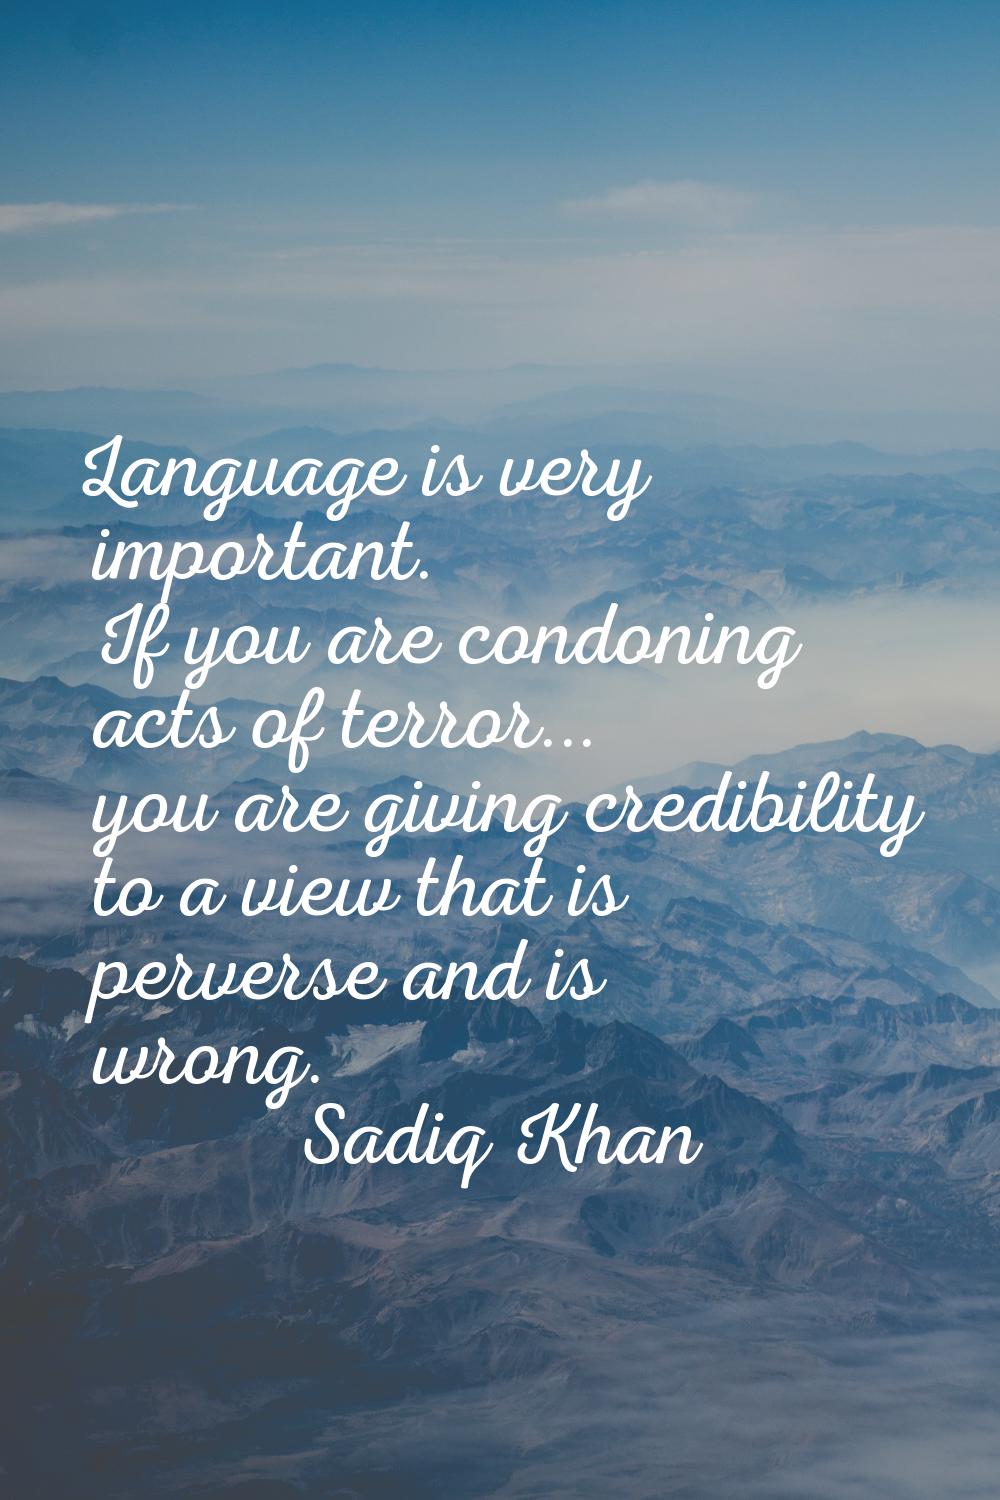 Language is very important. If you are condoning acts of terror... you are giving credibility to a 